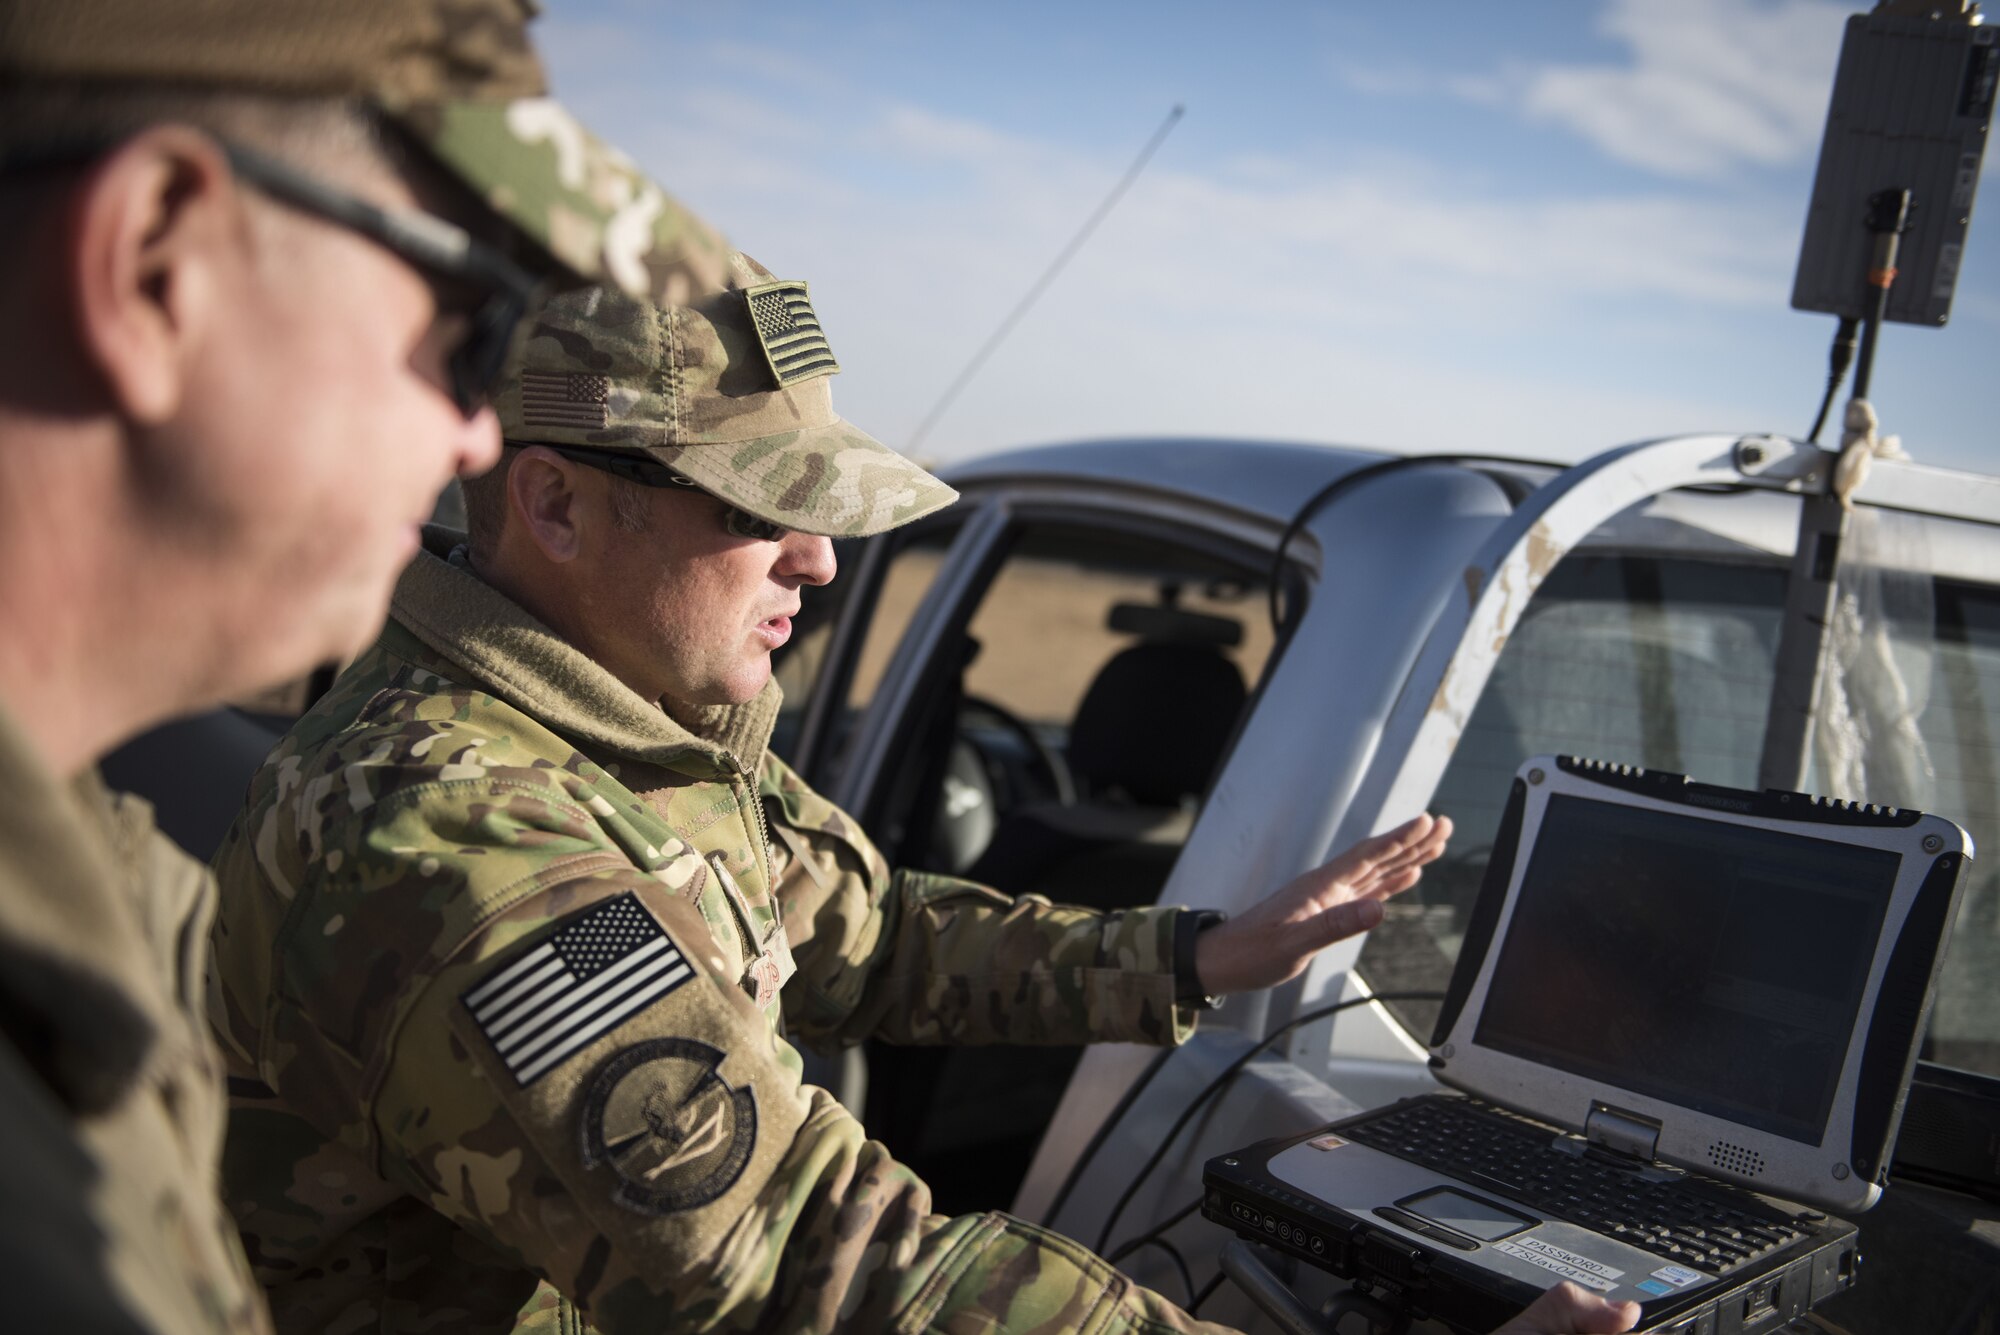 Tech Sgt. Matthew Coutts, assigned to the 332d Expeditionary Security Forces Squadron, demonstrates the capabilities of the Raven B Digital Data Link drone for Brig. Gen. Kyle Robinson, 332d Air Expeditionary Wing commander, Jan. 24, 2018 in Southwest Asia. The 332d ESFS uses the Raven B to monitor activity on the installation perimeter. (U.S. Air Force photo by Staff Sgt. Joshua Kleinholz)